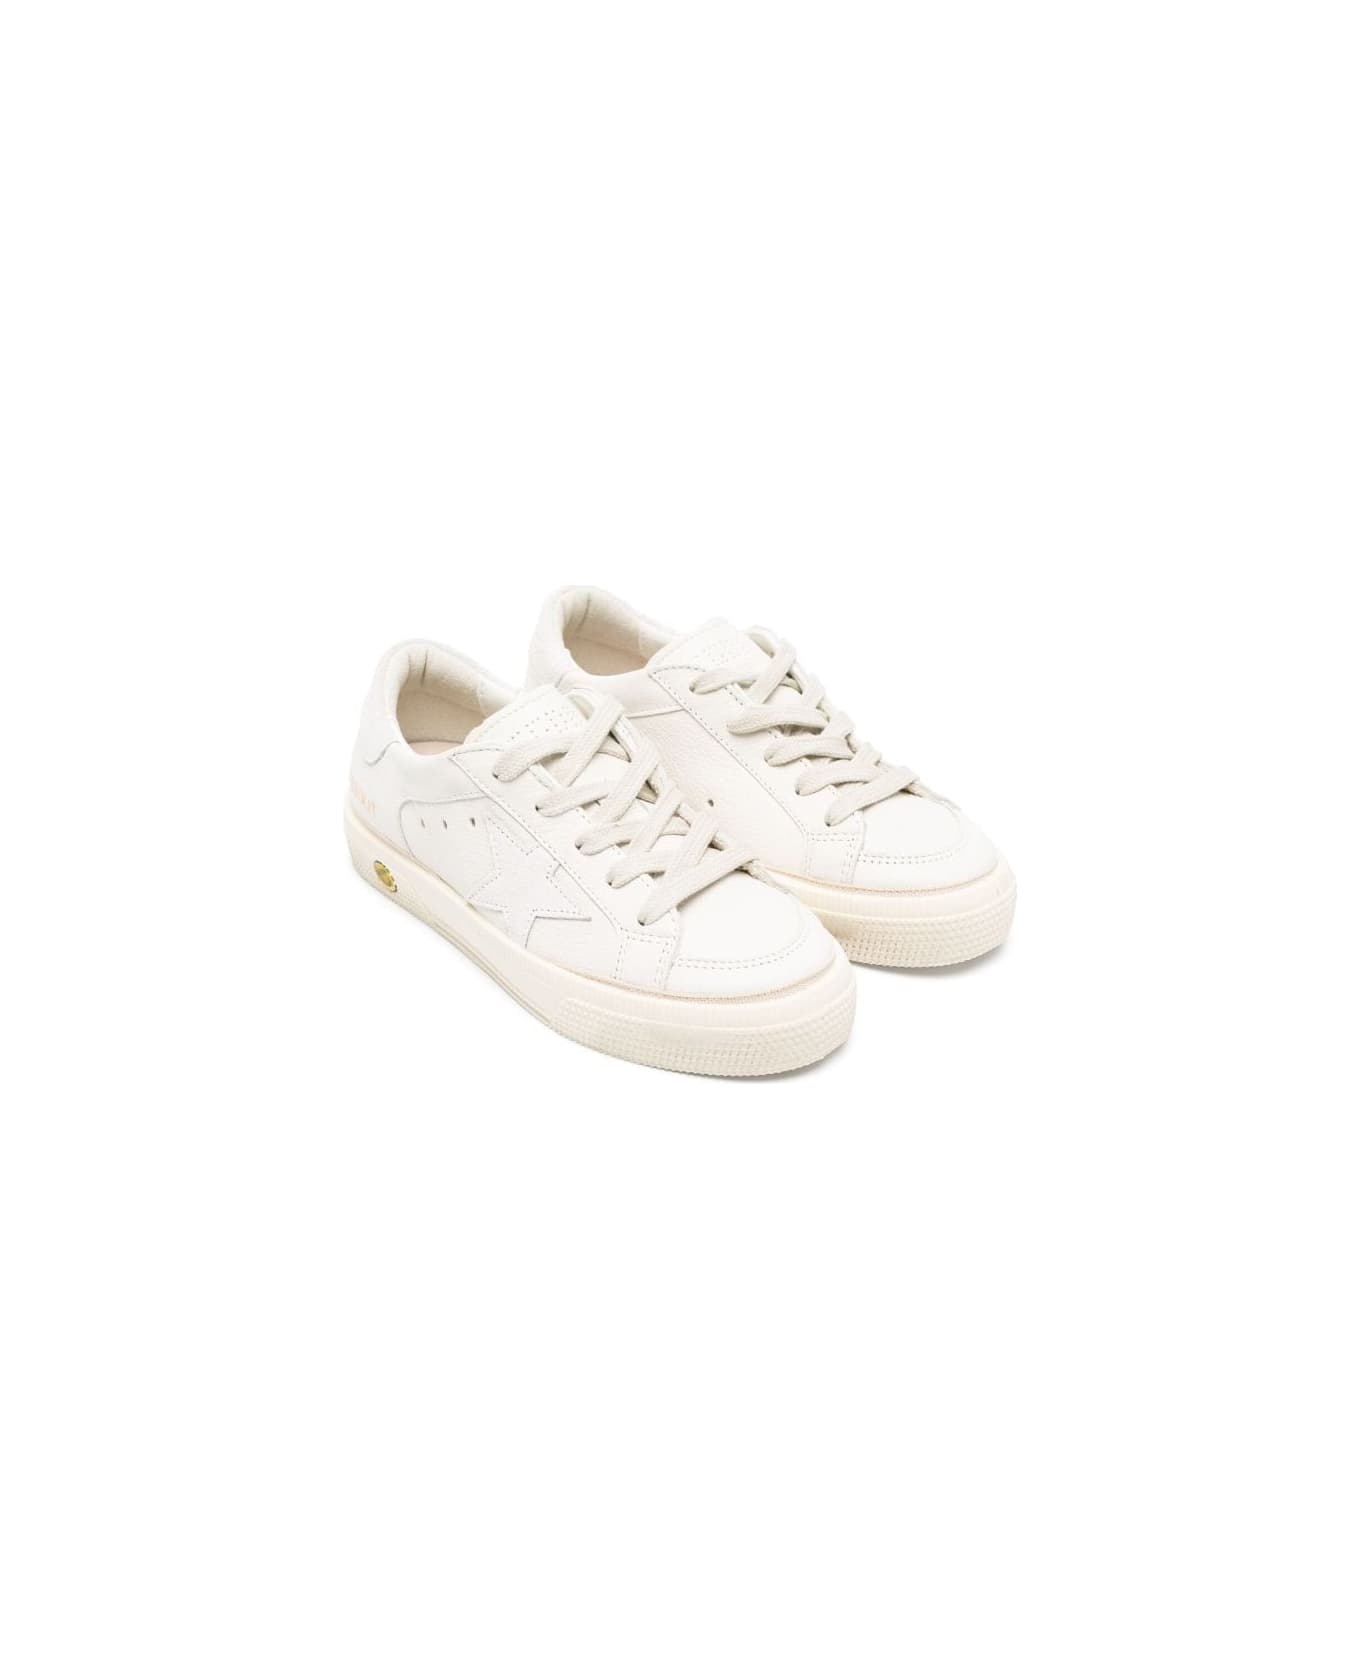 Golden Goose May Nappa Upper Suede Star And Heel - Optic White シューズ